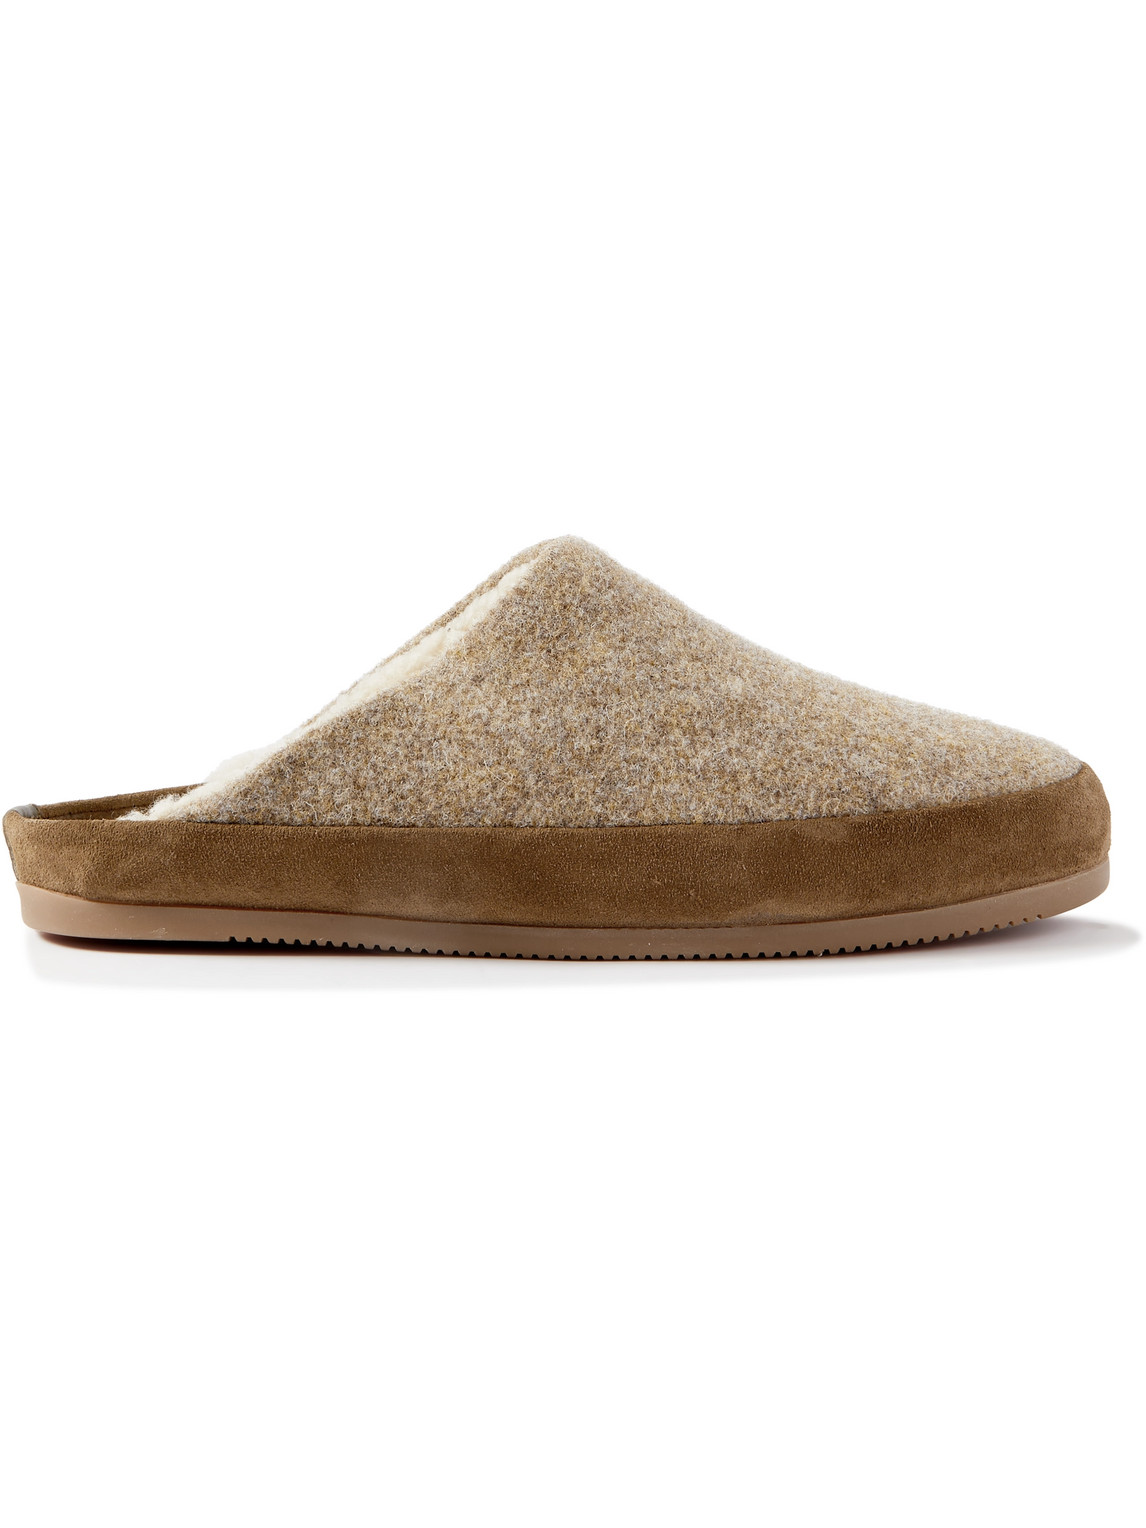 Mulo - Suede-Trimmed Shearling-Lined Recycled-Wool Slippers - Men - Brown - UK 8.5 von Mulo